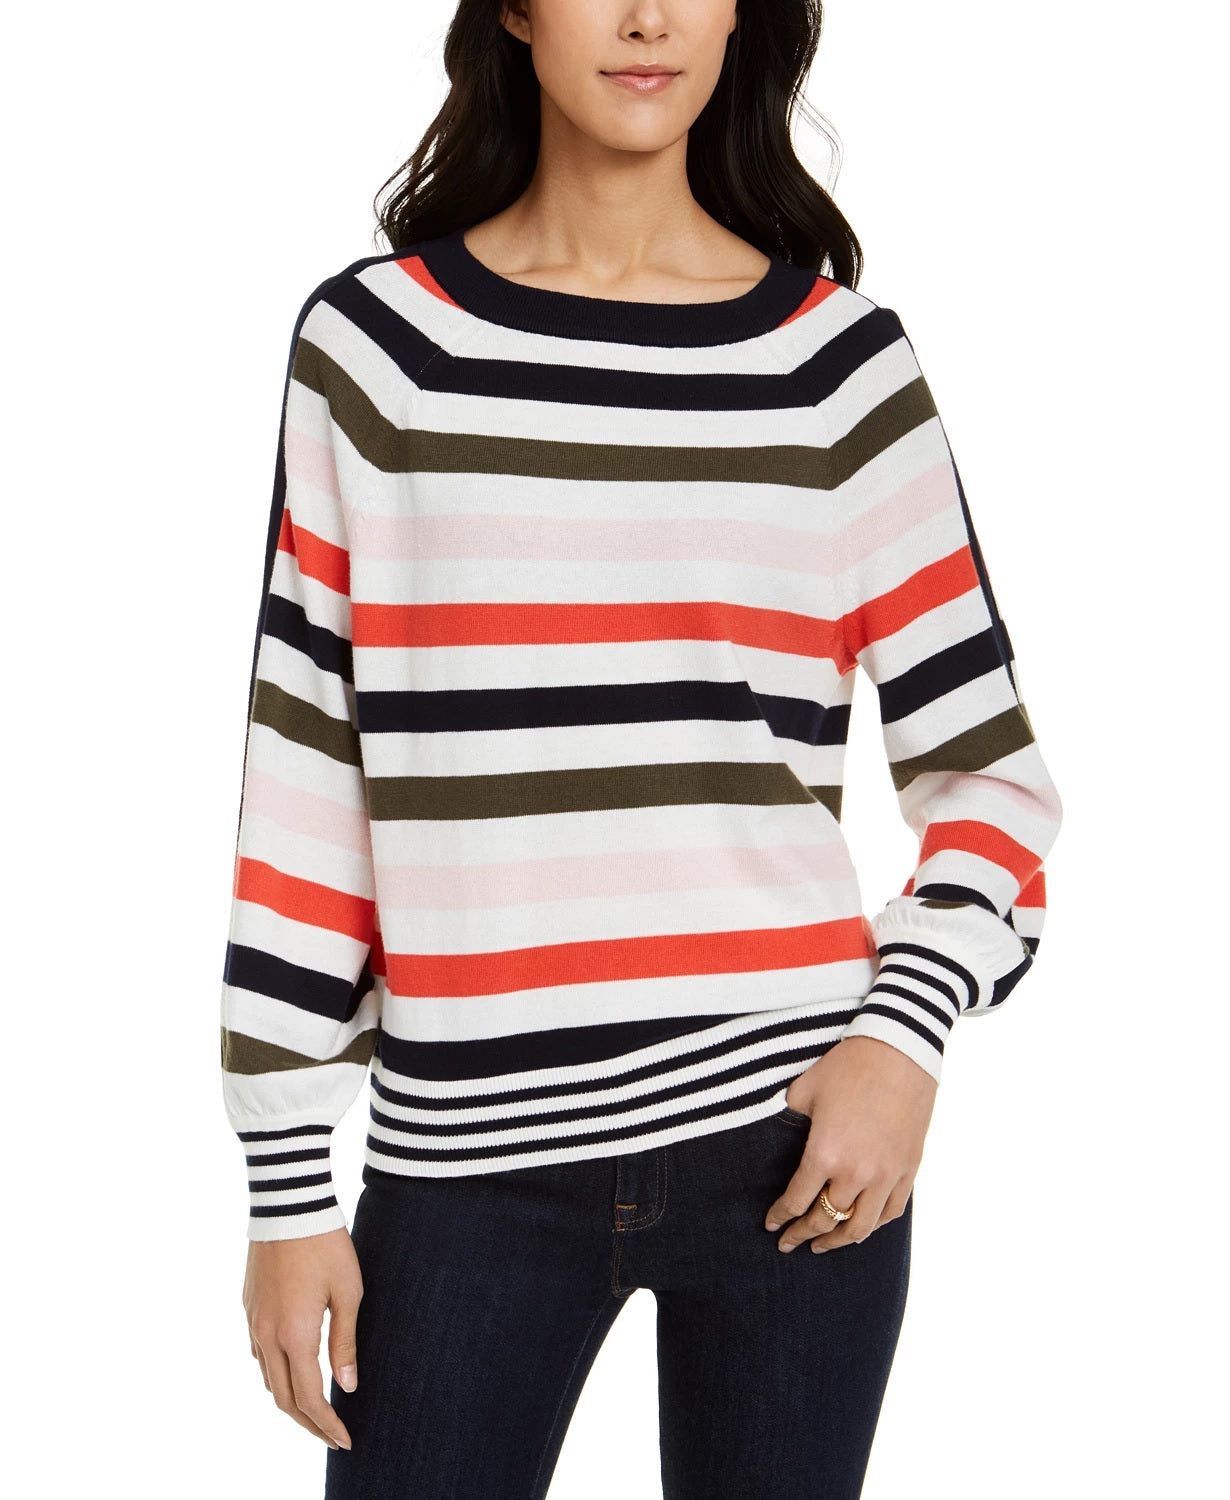 Tommy Hilfiger Women's Color Block Long Sleeve Crew Neck T-Shirt Sweater White Size Small